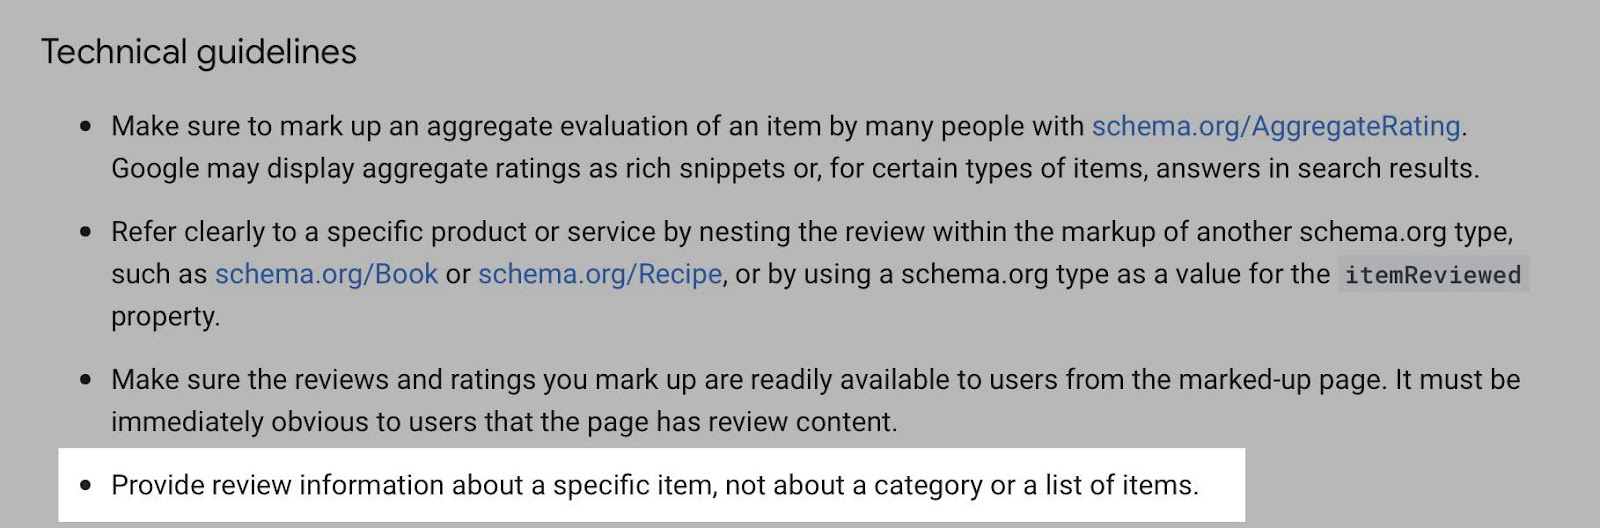 Technical guidelines from Google about using structured data